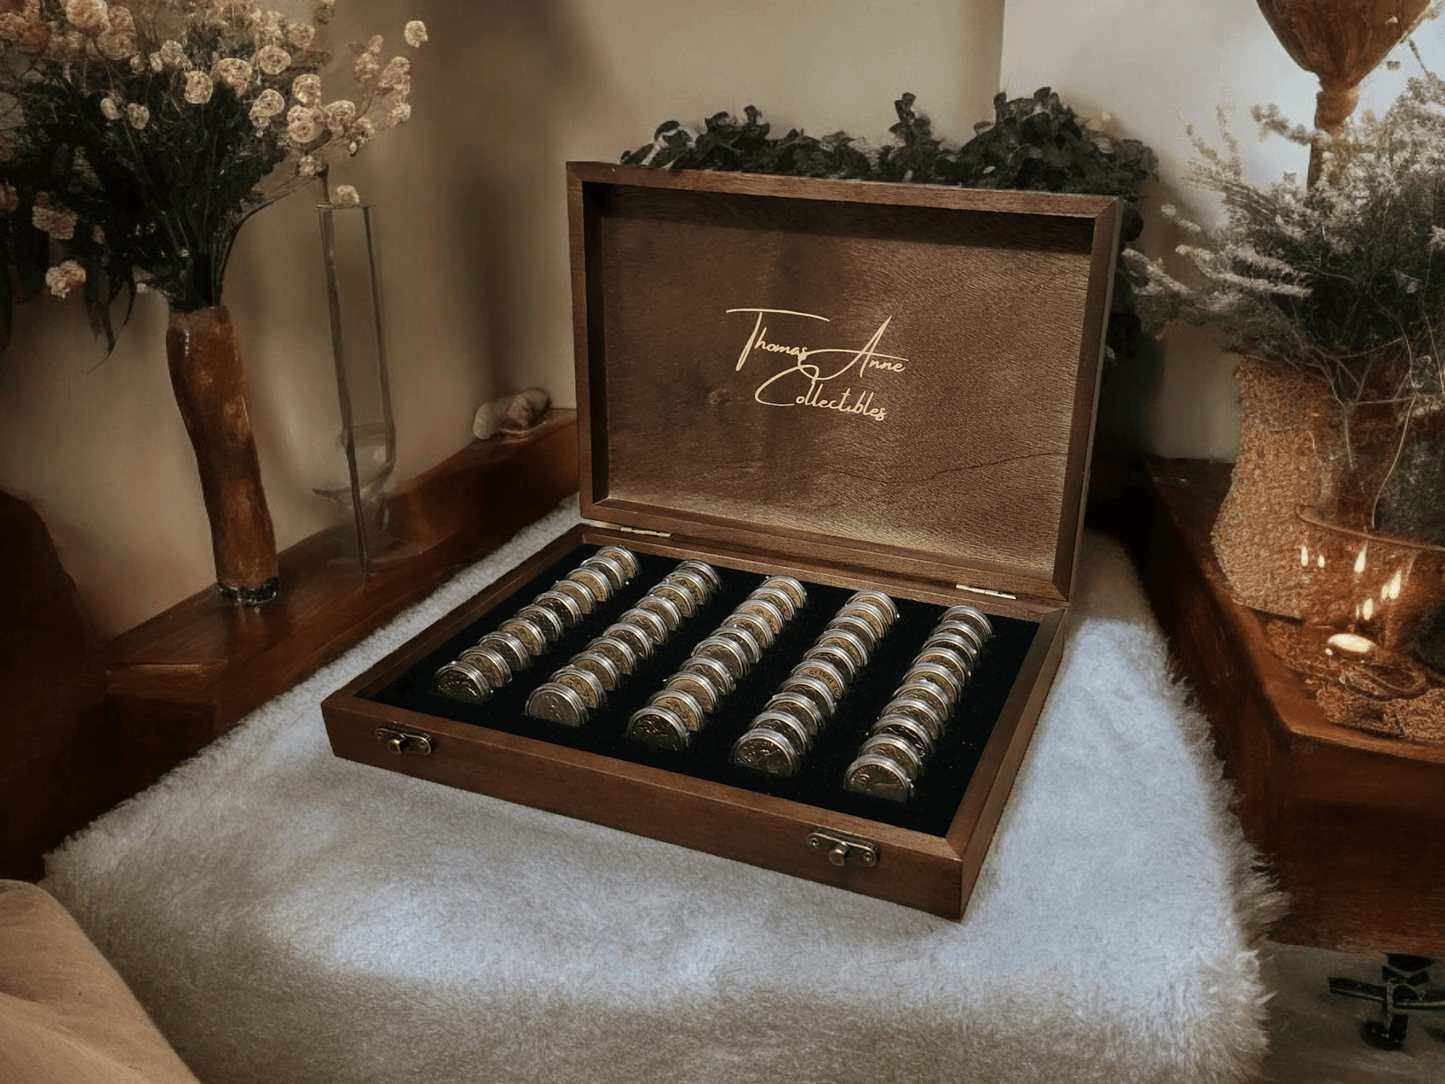 Artisan-Crafted Mahogany Australian $1 Coin Storage Case - Thomas Anne Collectibles